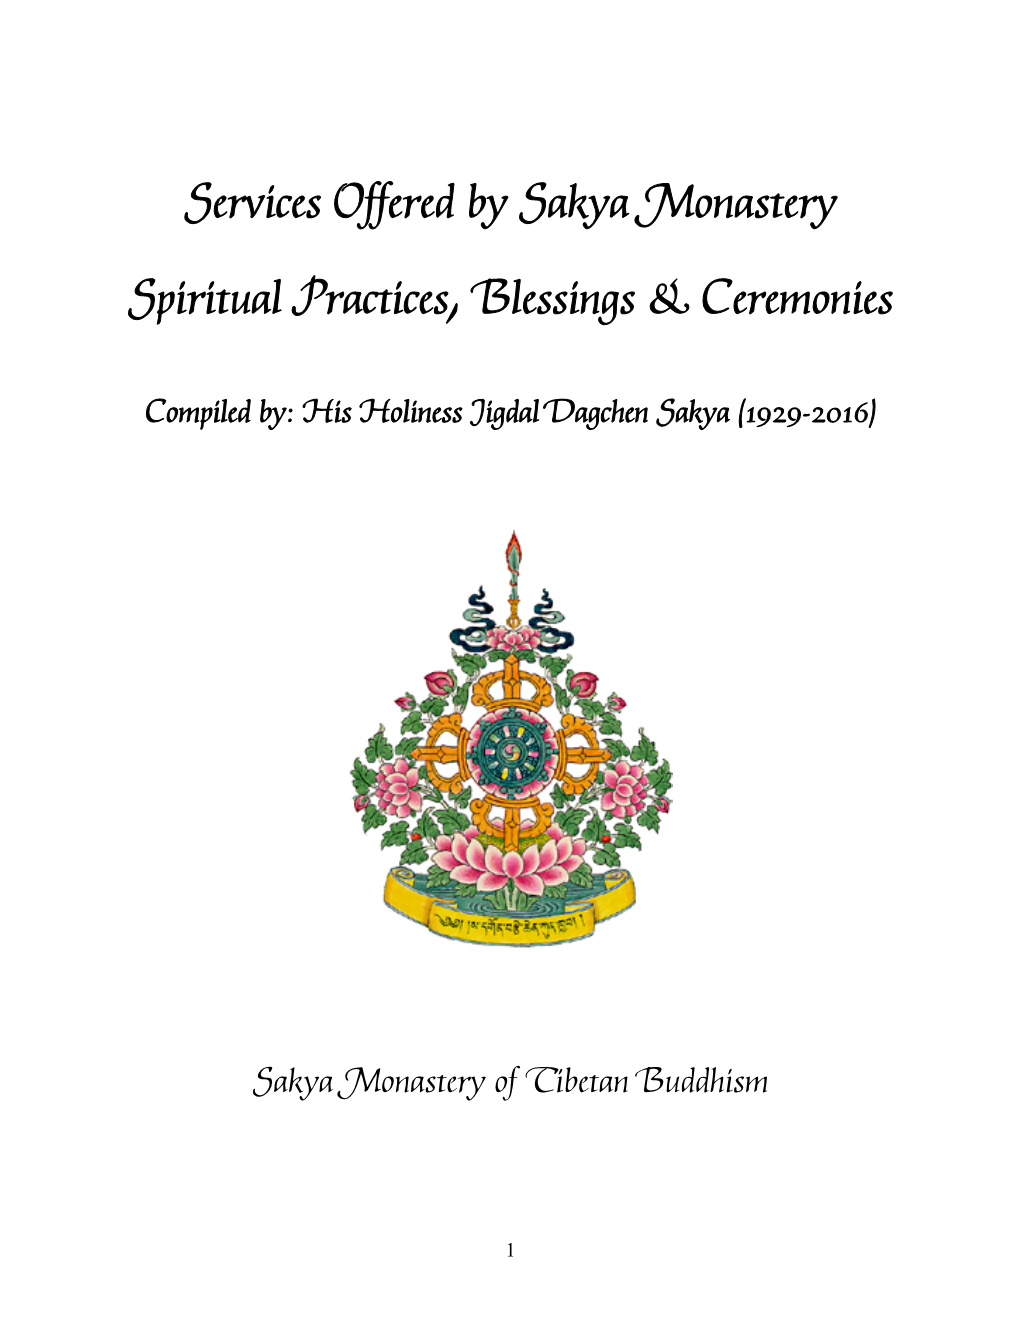 Services Offered by Sakya Monastery Spiritual Practices, Blessings & Ceremonies